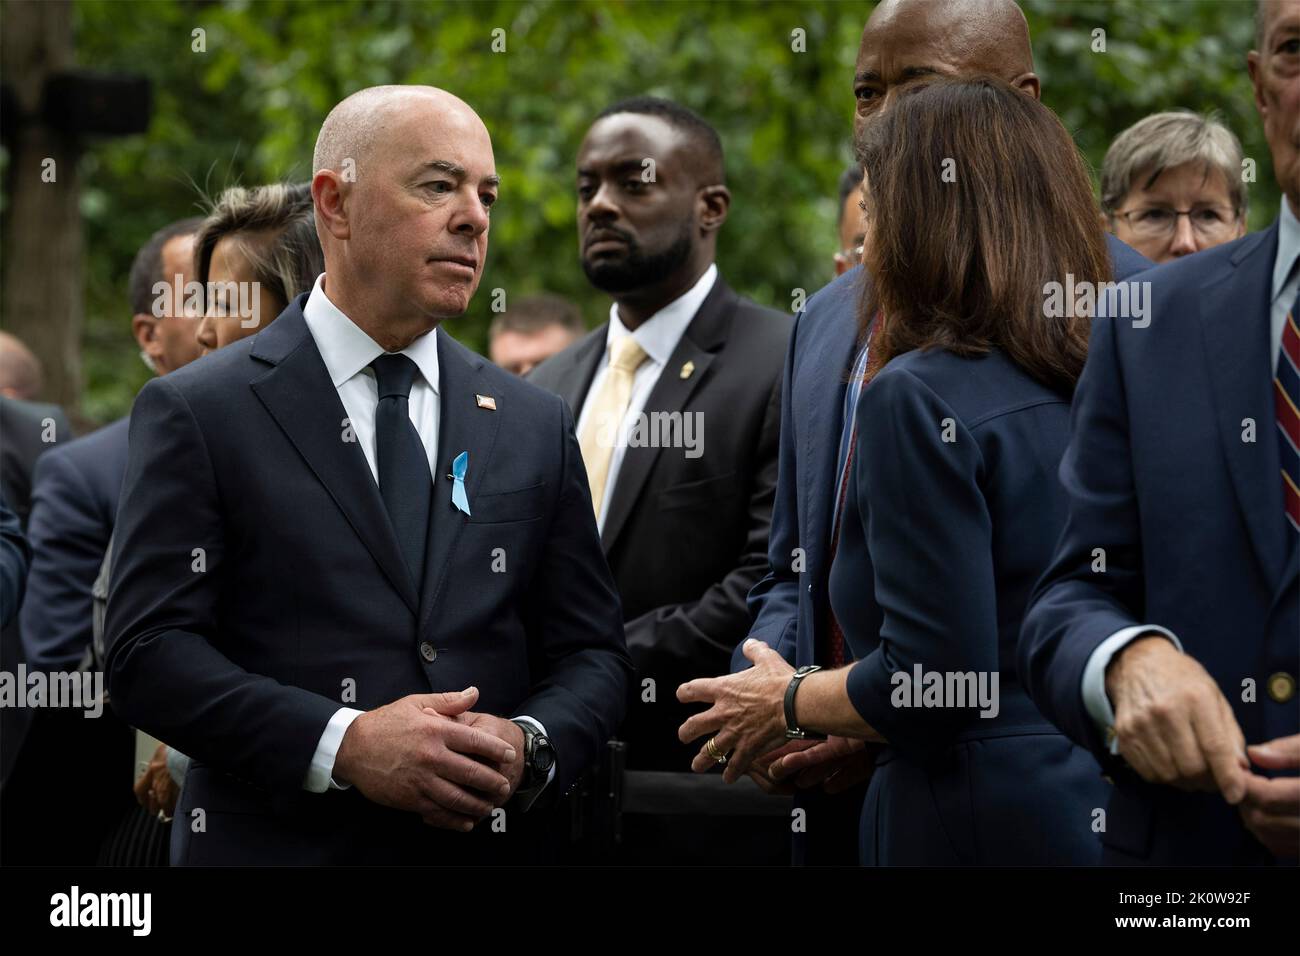 New York, United States of America. 11 September, 2022. U.S Vice President Kamala Harris, right, speaks with Homeland Security Secretary Alejandro Mayorkas, left, during the ceremony remembering the victims of the 9/11 attacks at the National September 11 Memorial Museum, September 11, 2022 in New York City. The nation marked the 21st anniversary of the al-Qaida terrorists attacks that killed nearly 3,000 people.  Credit: Sydney Phoenix/DHS Photo/Alamy Live News Stock Photo